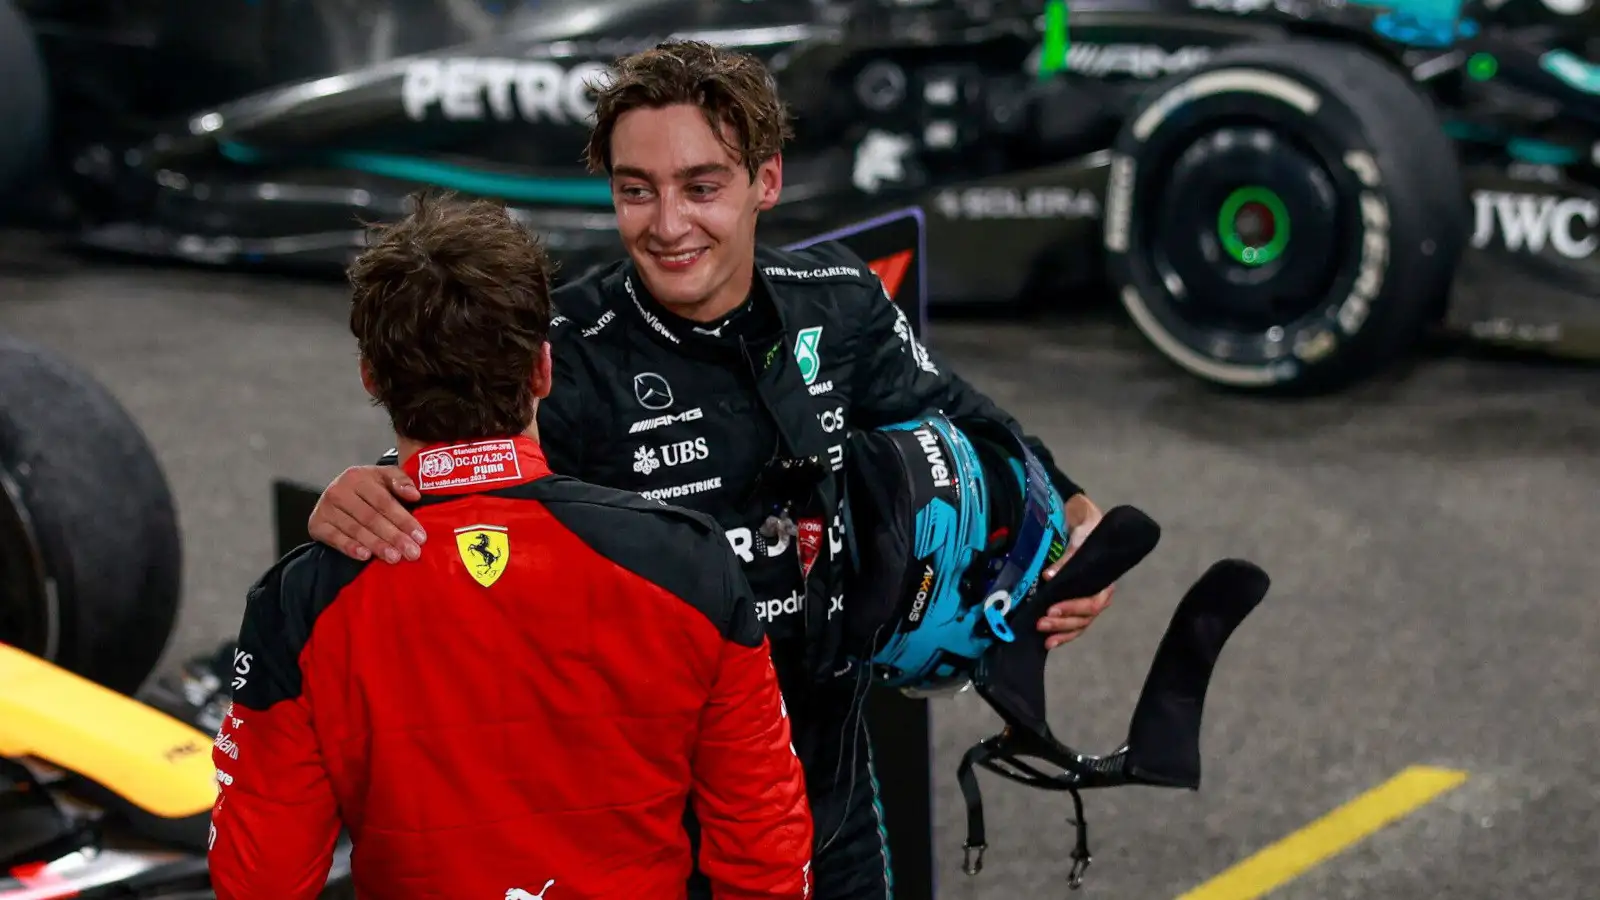 Mercedes driver George Russell and Charles Leclerc speaking after the season finale.